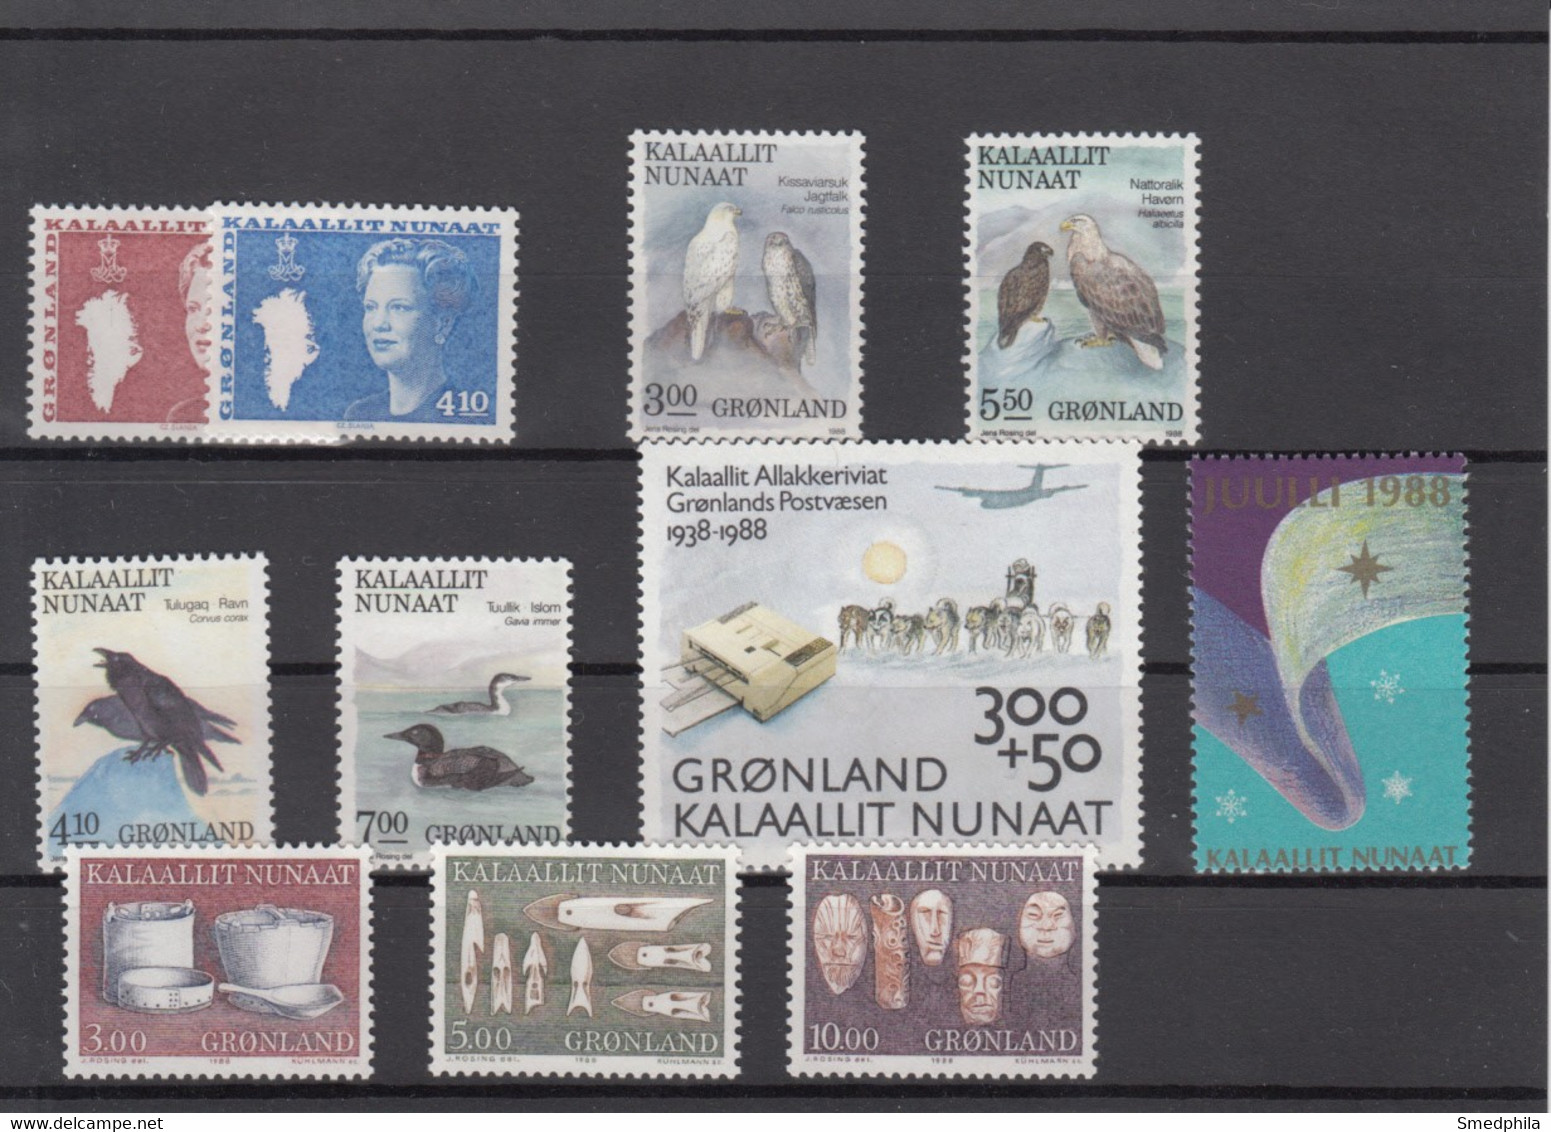 Greenland 1988 - Full Year MNH ** - Años Completos